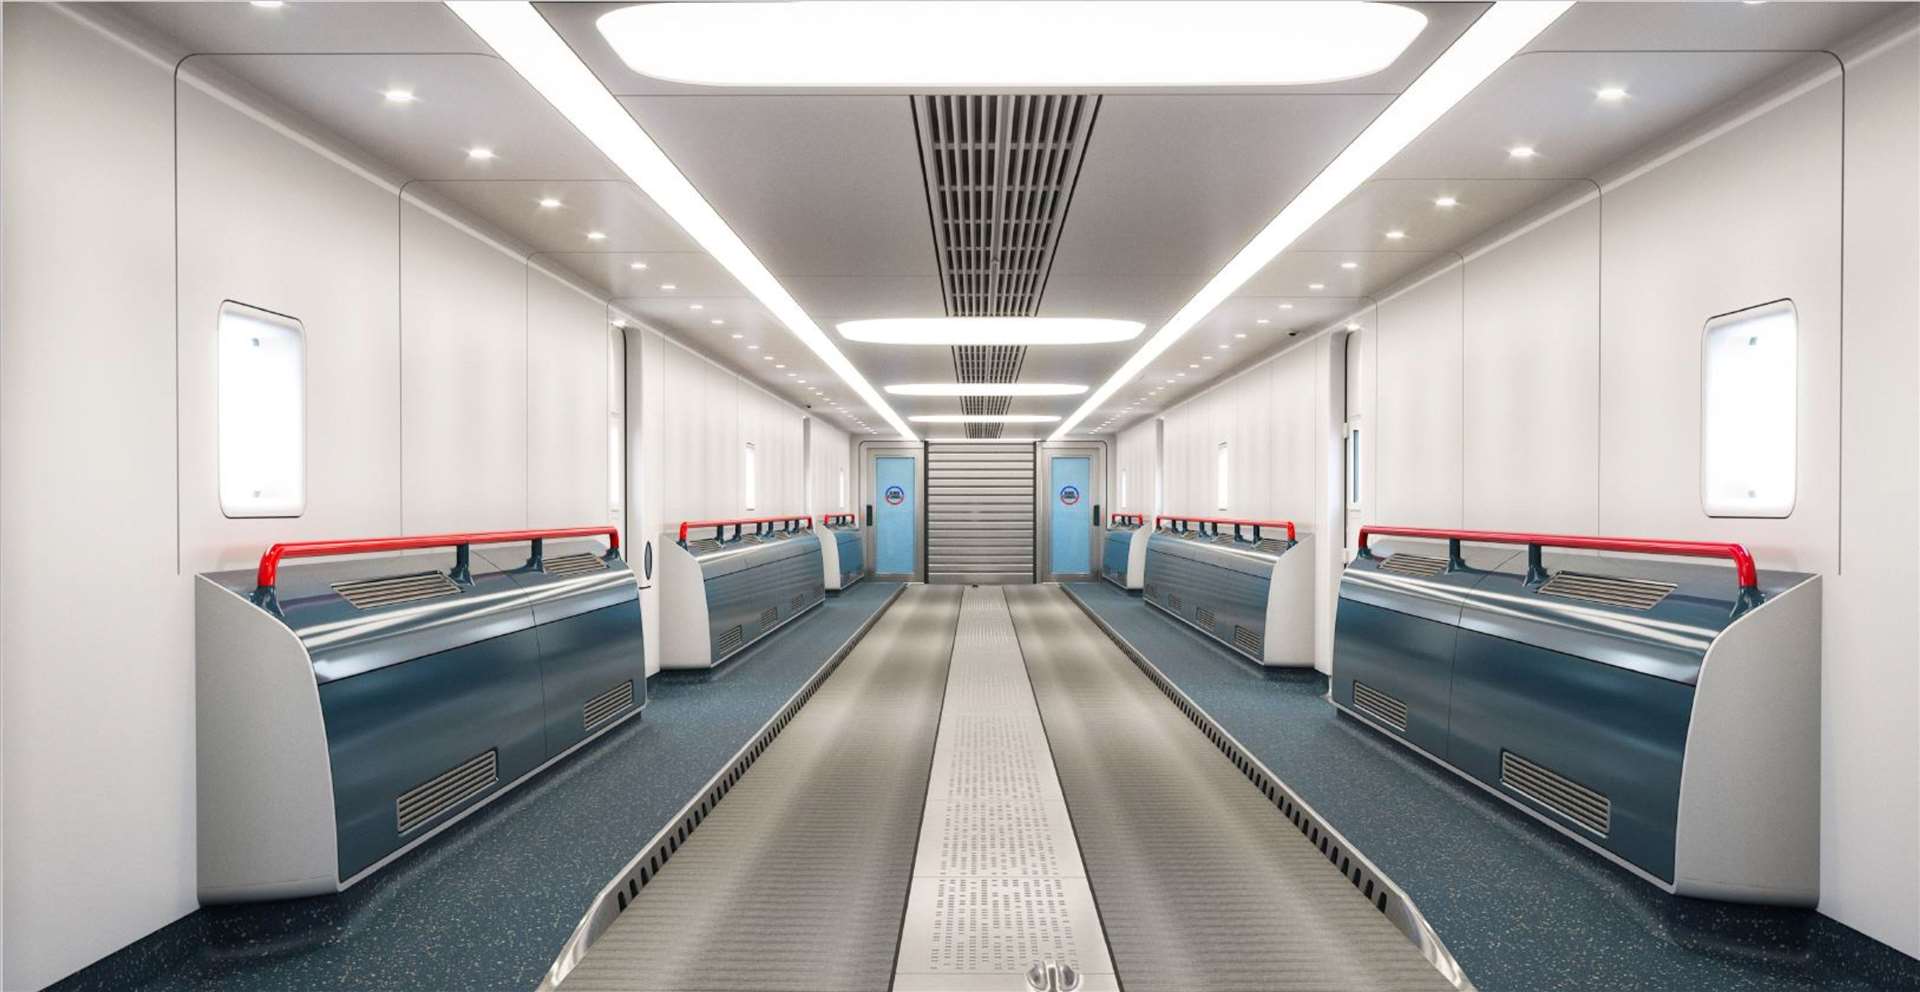 How the passenger shuttles could look once renovated. Credit: Eurotunnel (7932959)